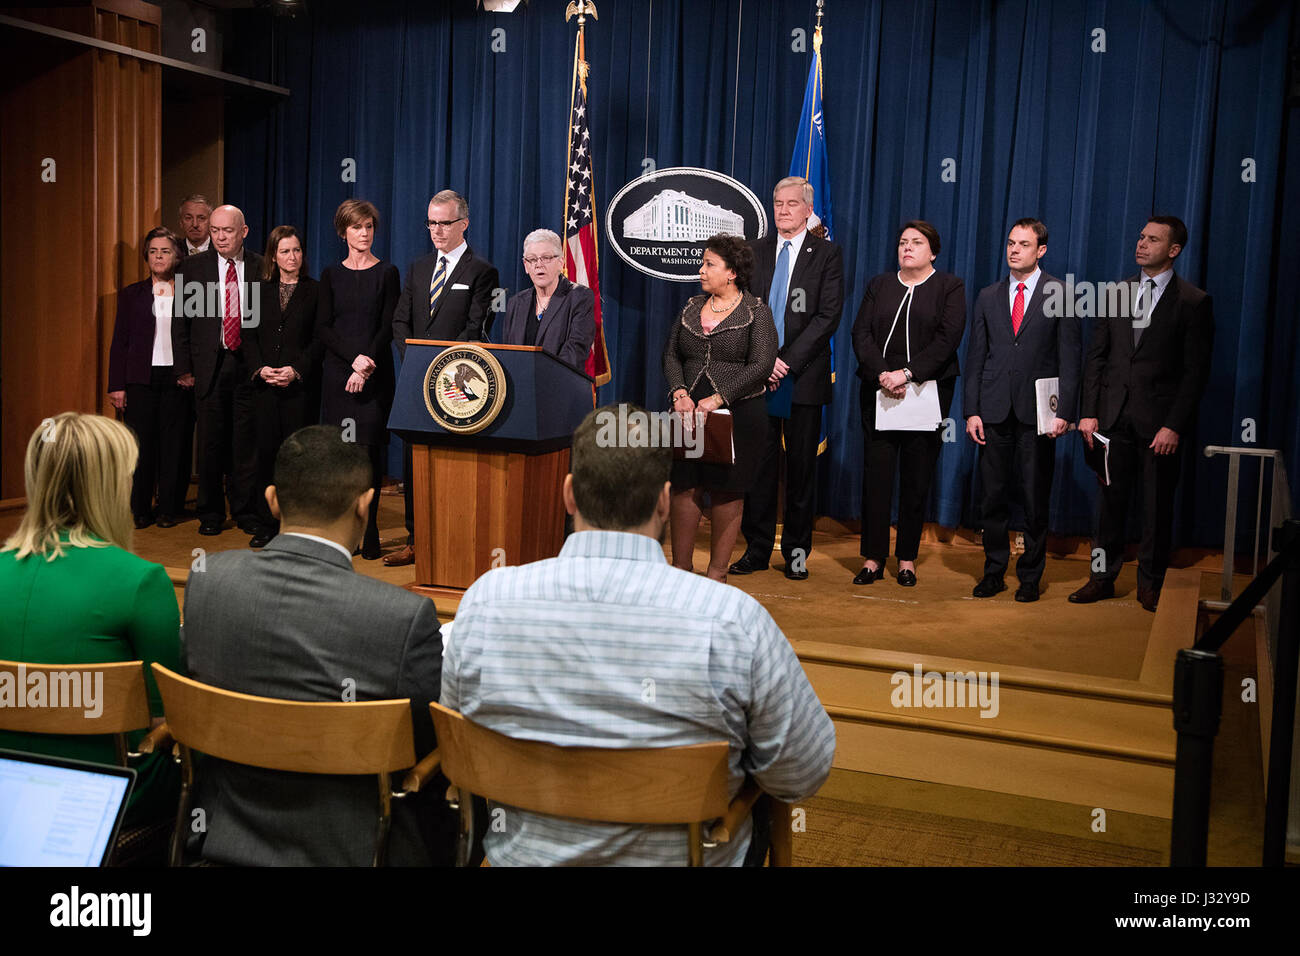 011117: Washington, DC - CBP Attends Press Conference at the Department Of Justice - Volkswagen Emissions Investigation.  Announcements were made by Attorney General Loretta E. Lynch, EPA Administrator Gina McCarthy seen here speaking, Assistant Administrator Cynthia Giles, Deputy Attorney General Sally Q. Yates, FBI Deputy Director Andrew McCabe, Acting Deputy Secretary Russell C. Deyo for the Department of Homeland Security, U.S. Attorney Barbara L. McQuade of the Eastern District of Michigan, Assistant Attorney General Leslie R. Caldwell of the Justice Department’s Criminal Division, Assist Stock Photo